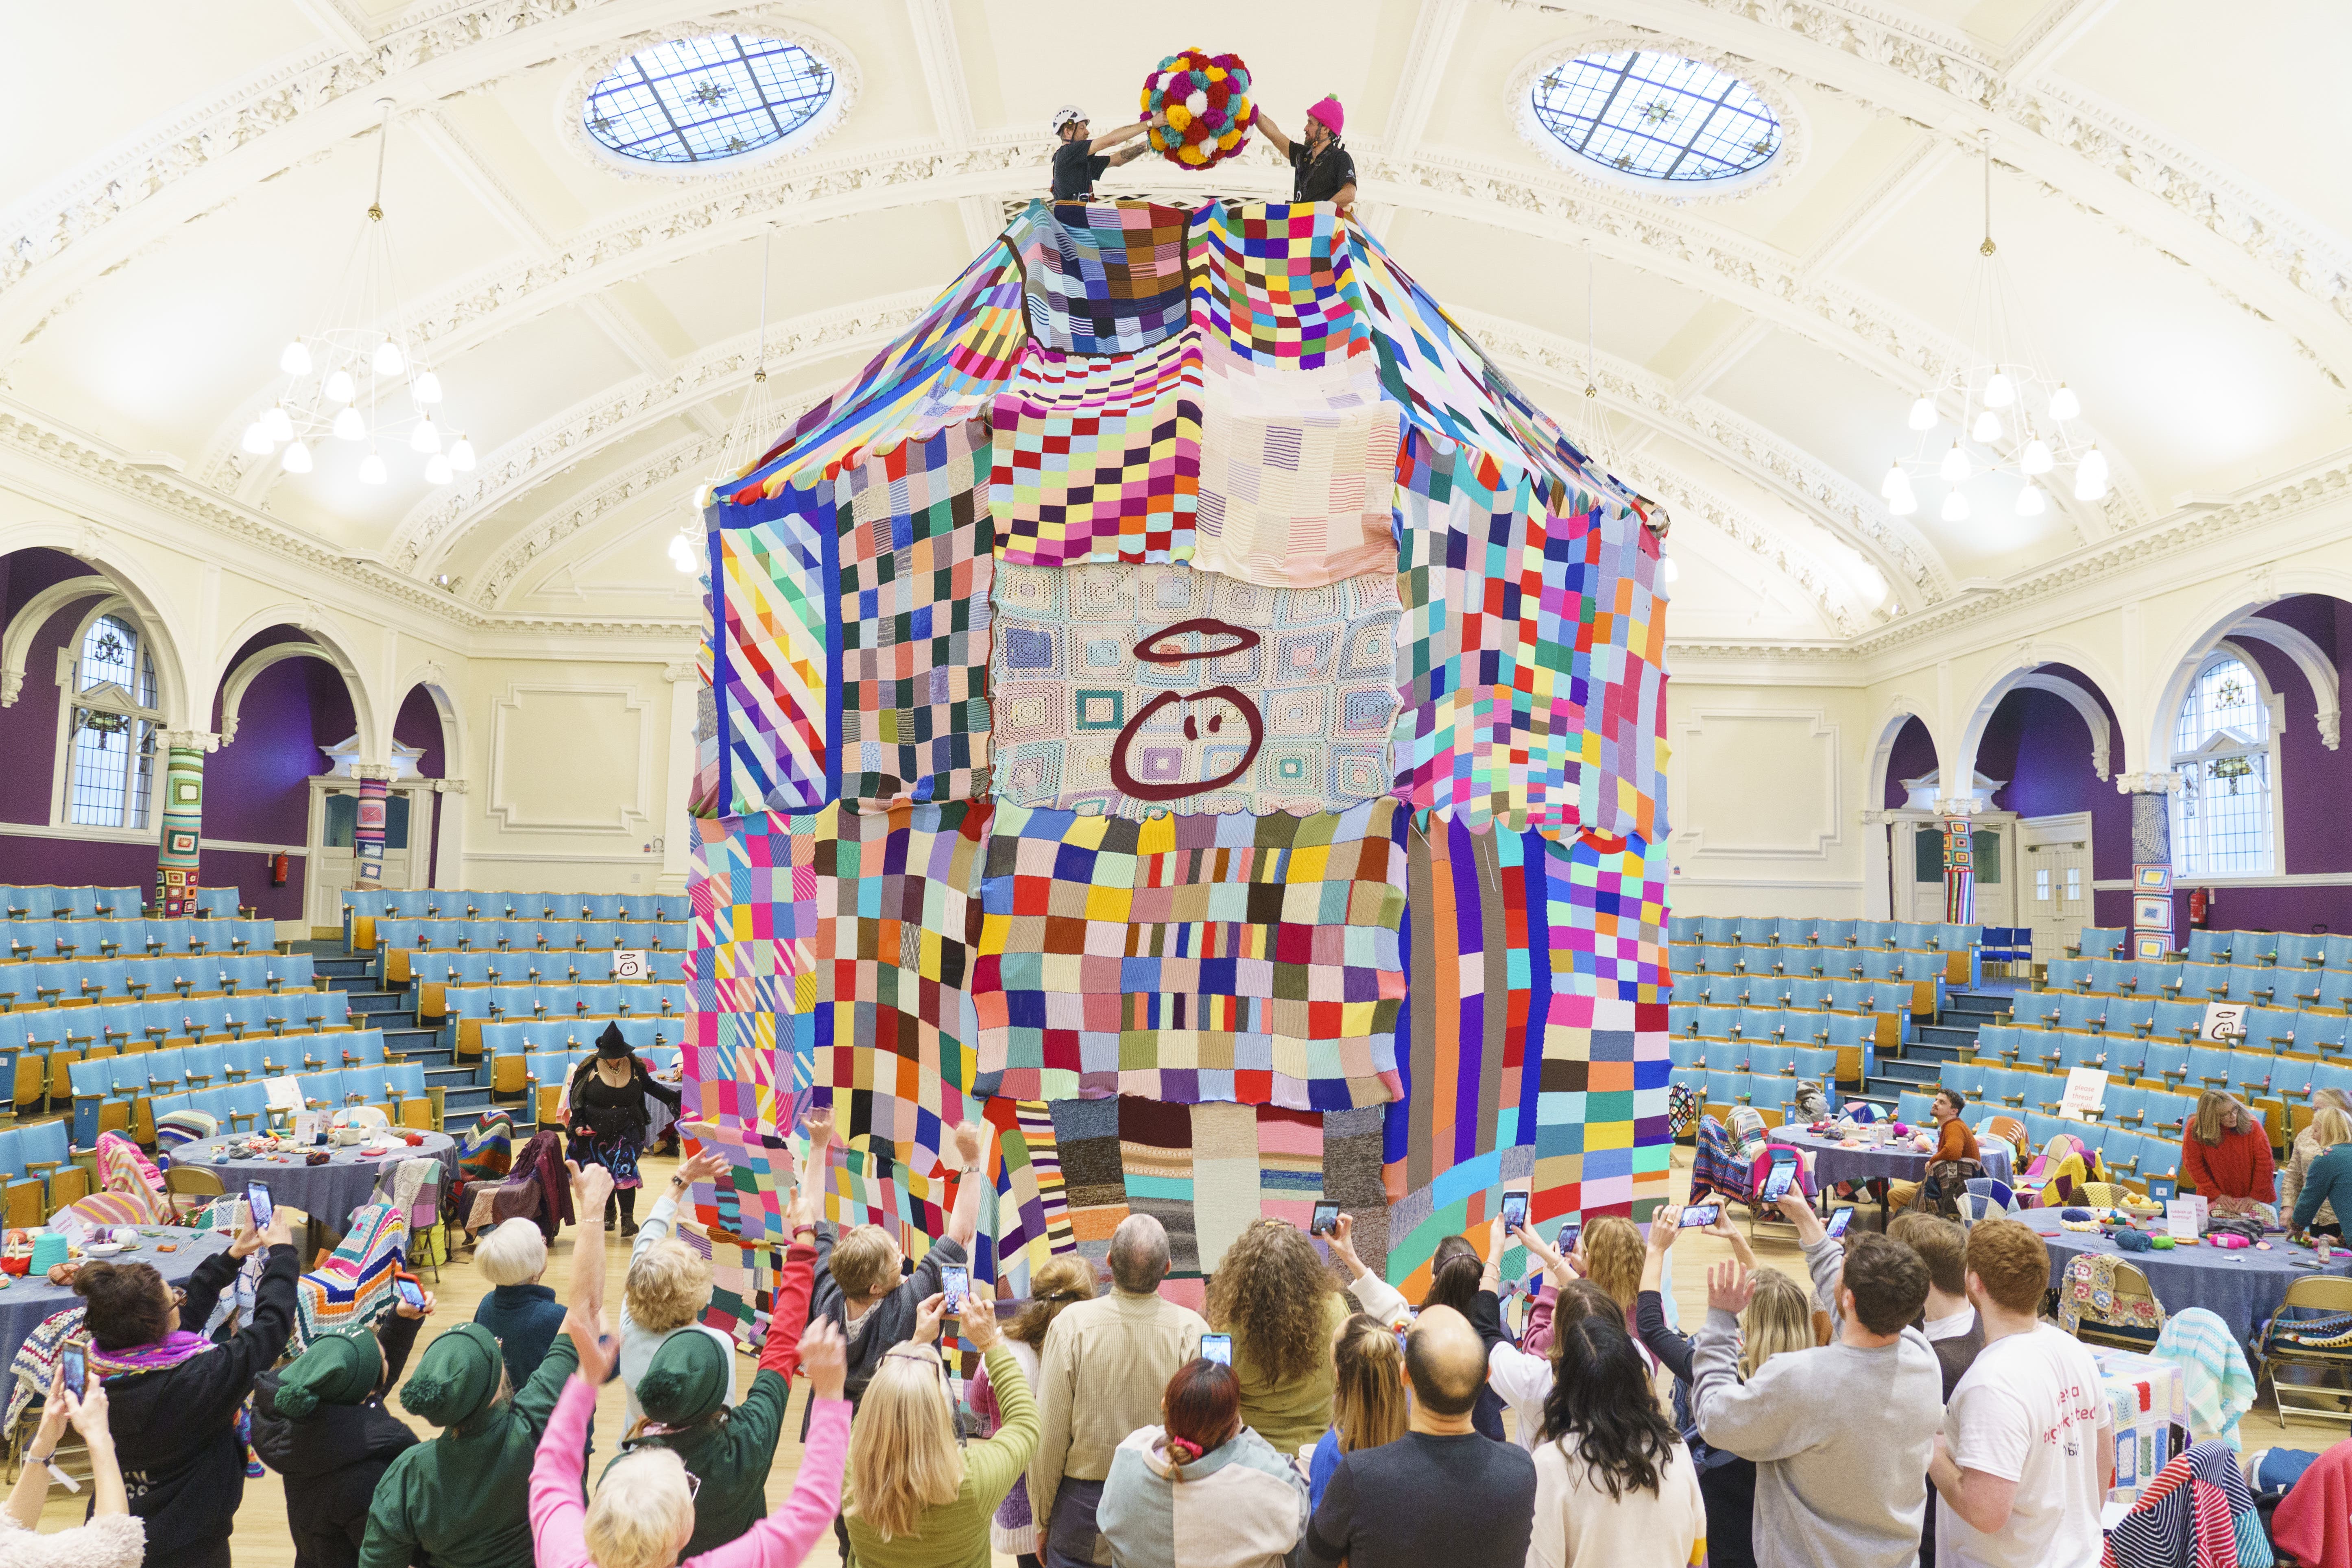 Largest knitted hat in UK made to raise funds for charity | The Independent